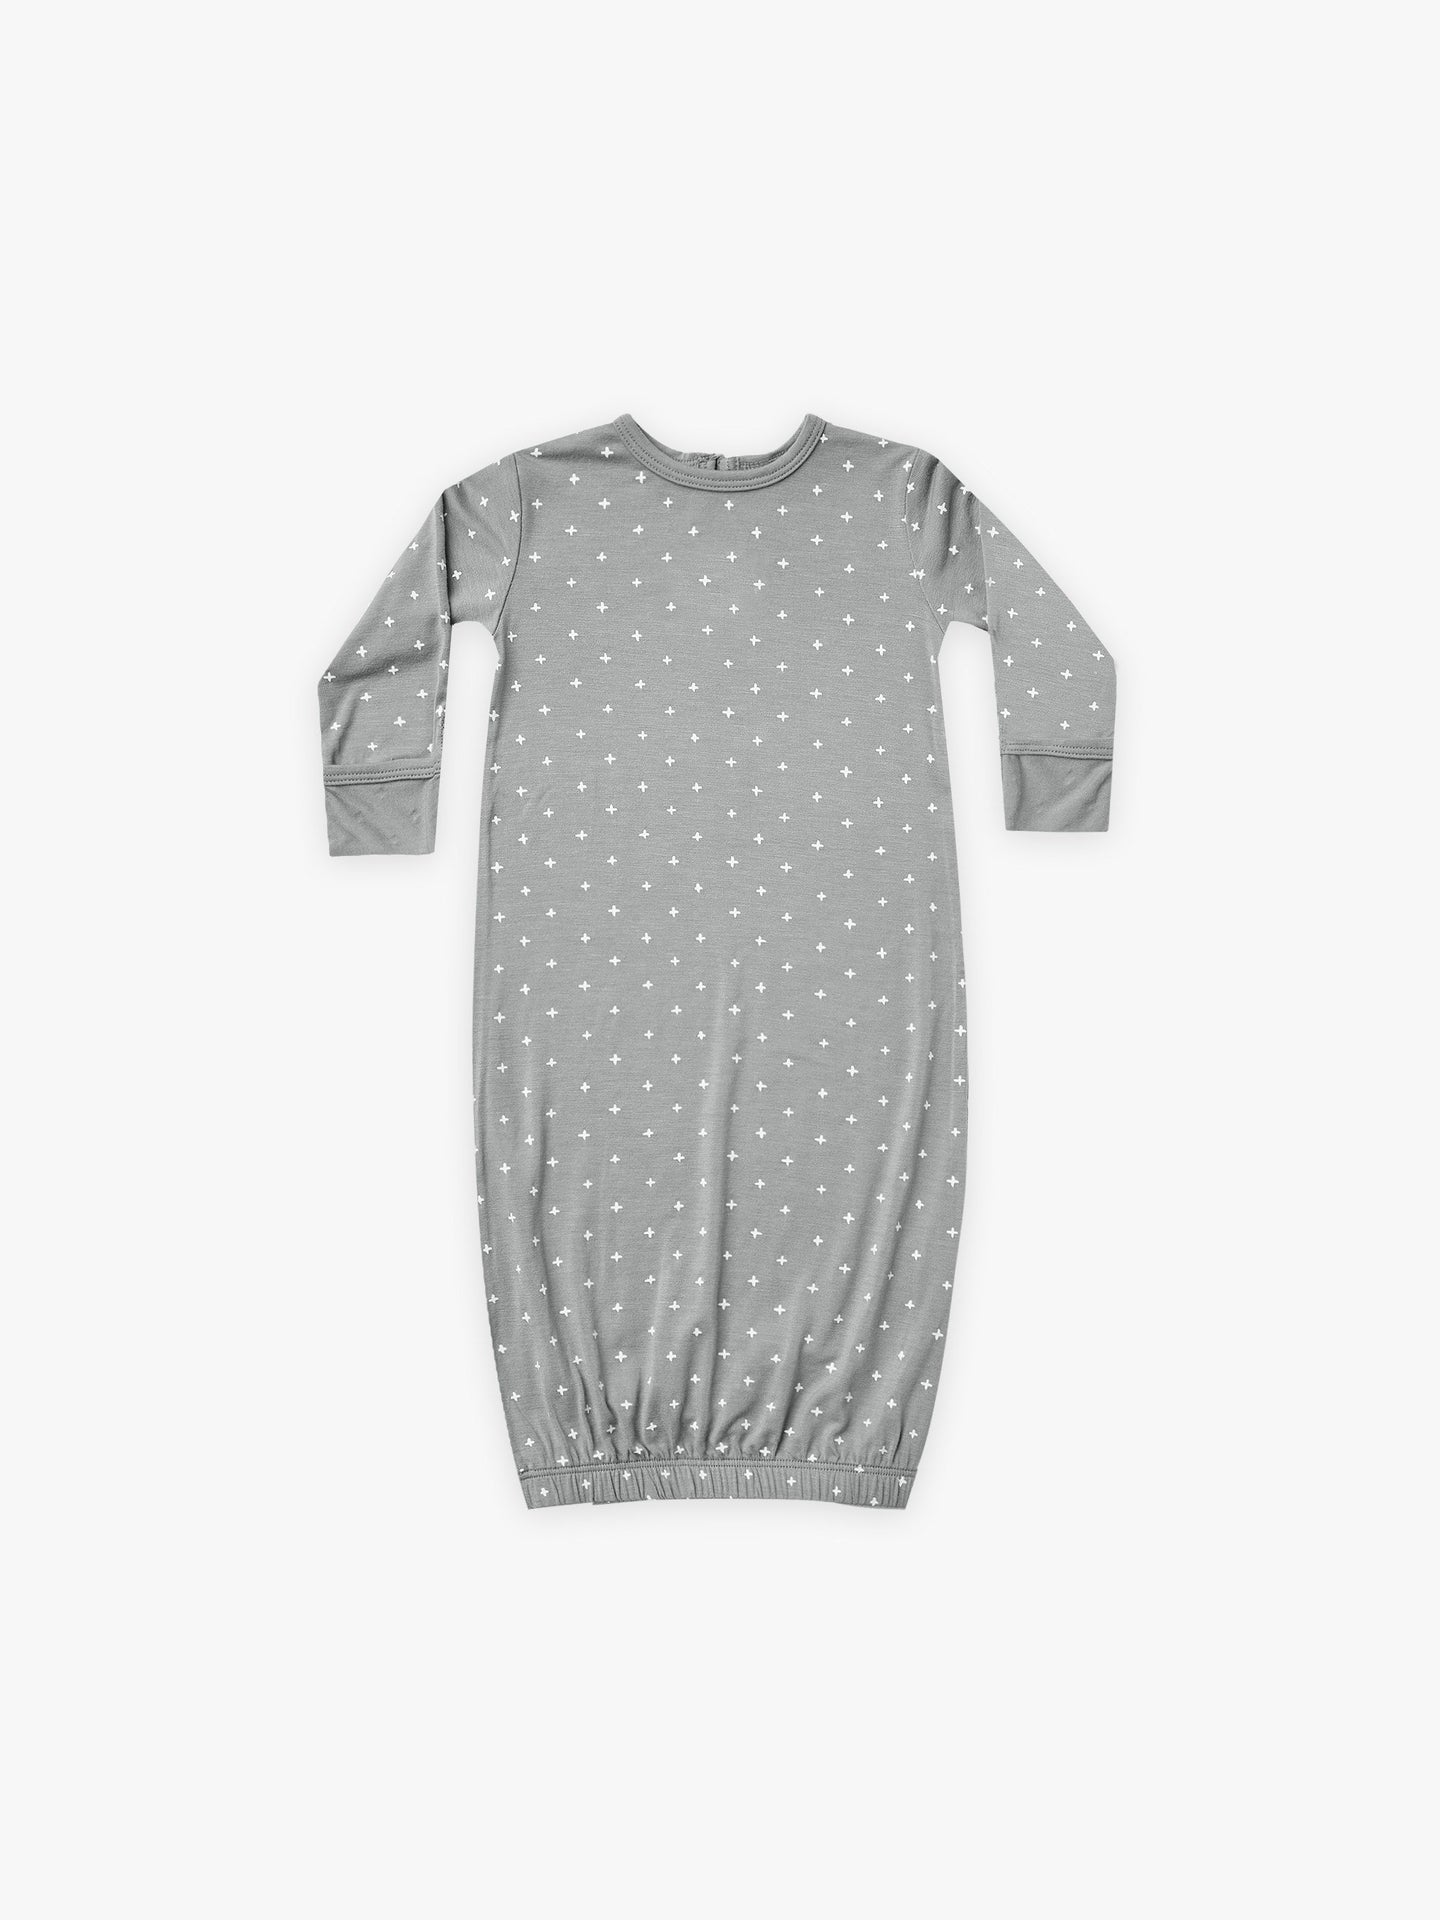 Quincy Mae - Criss Cross Bamboo Baby Gown - Dusty-Blue